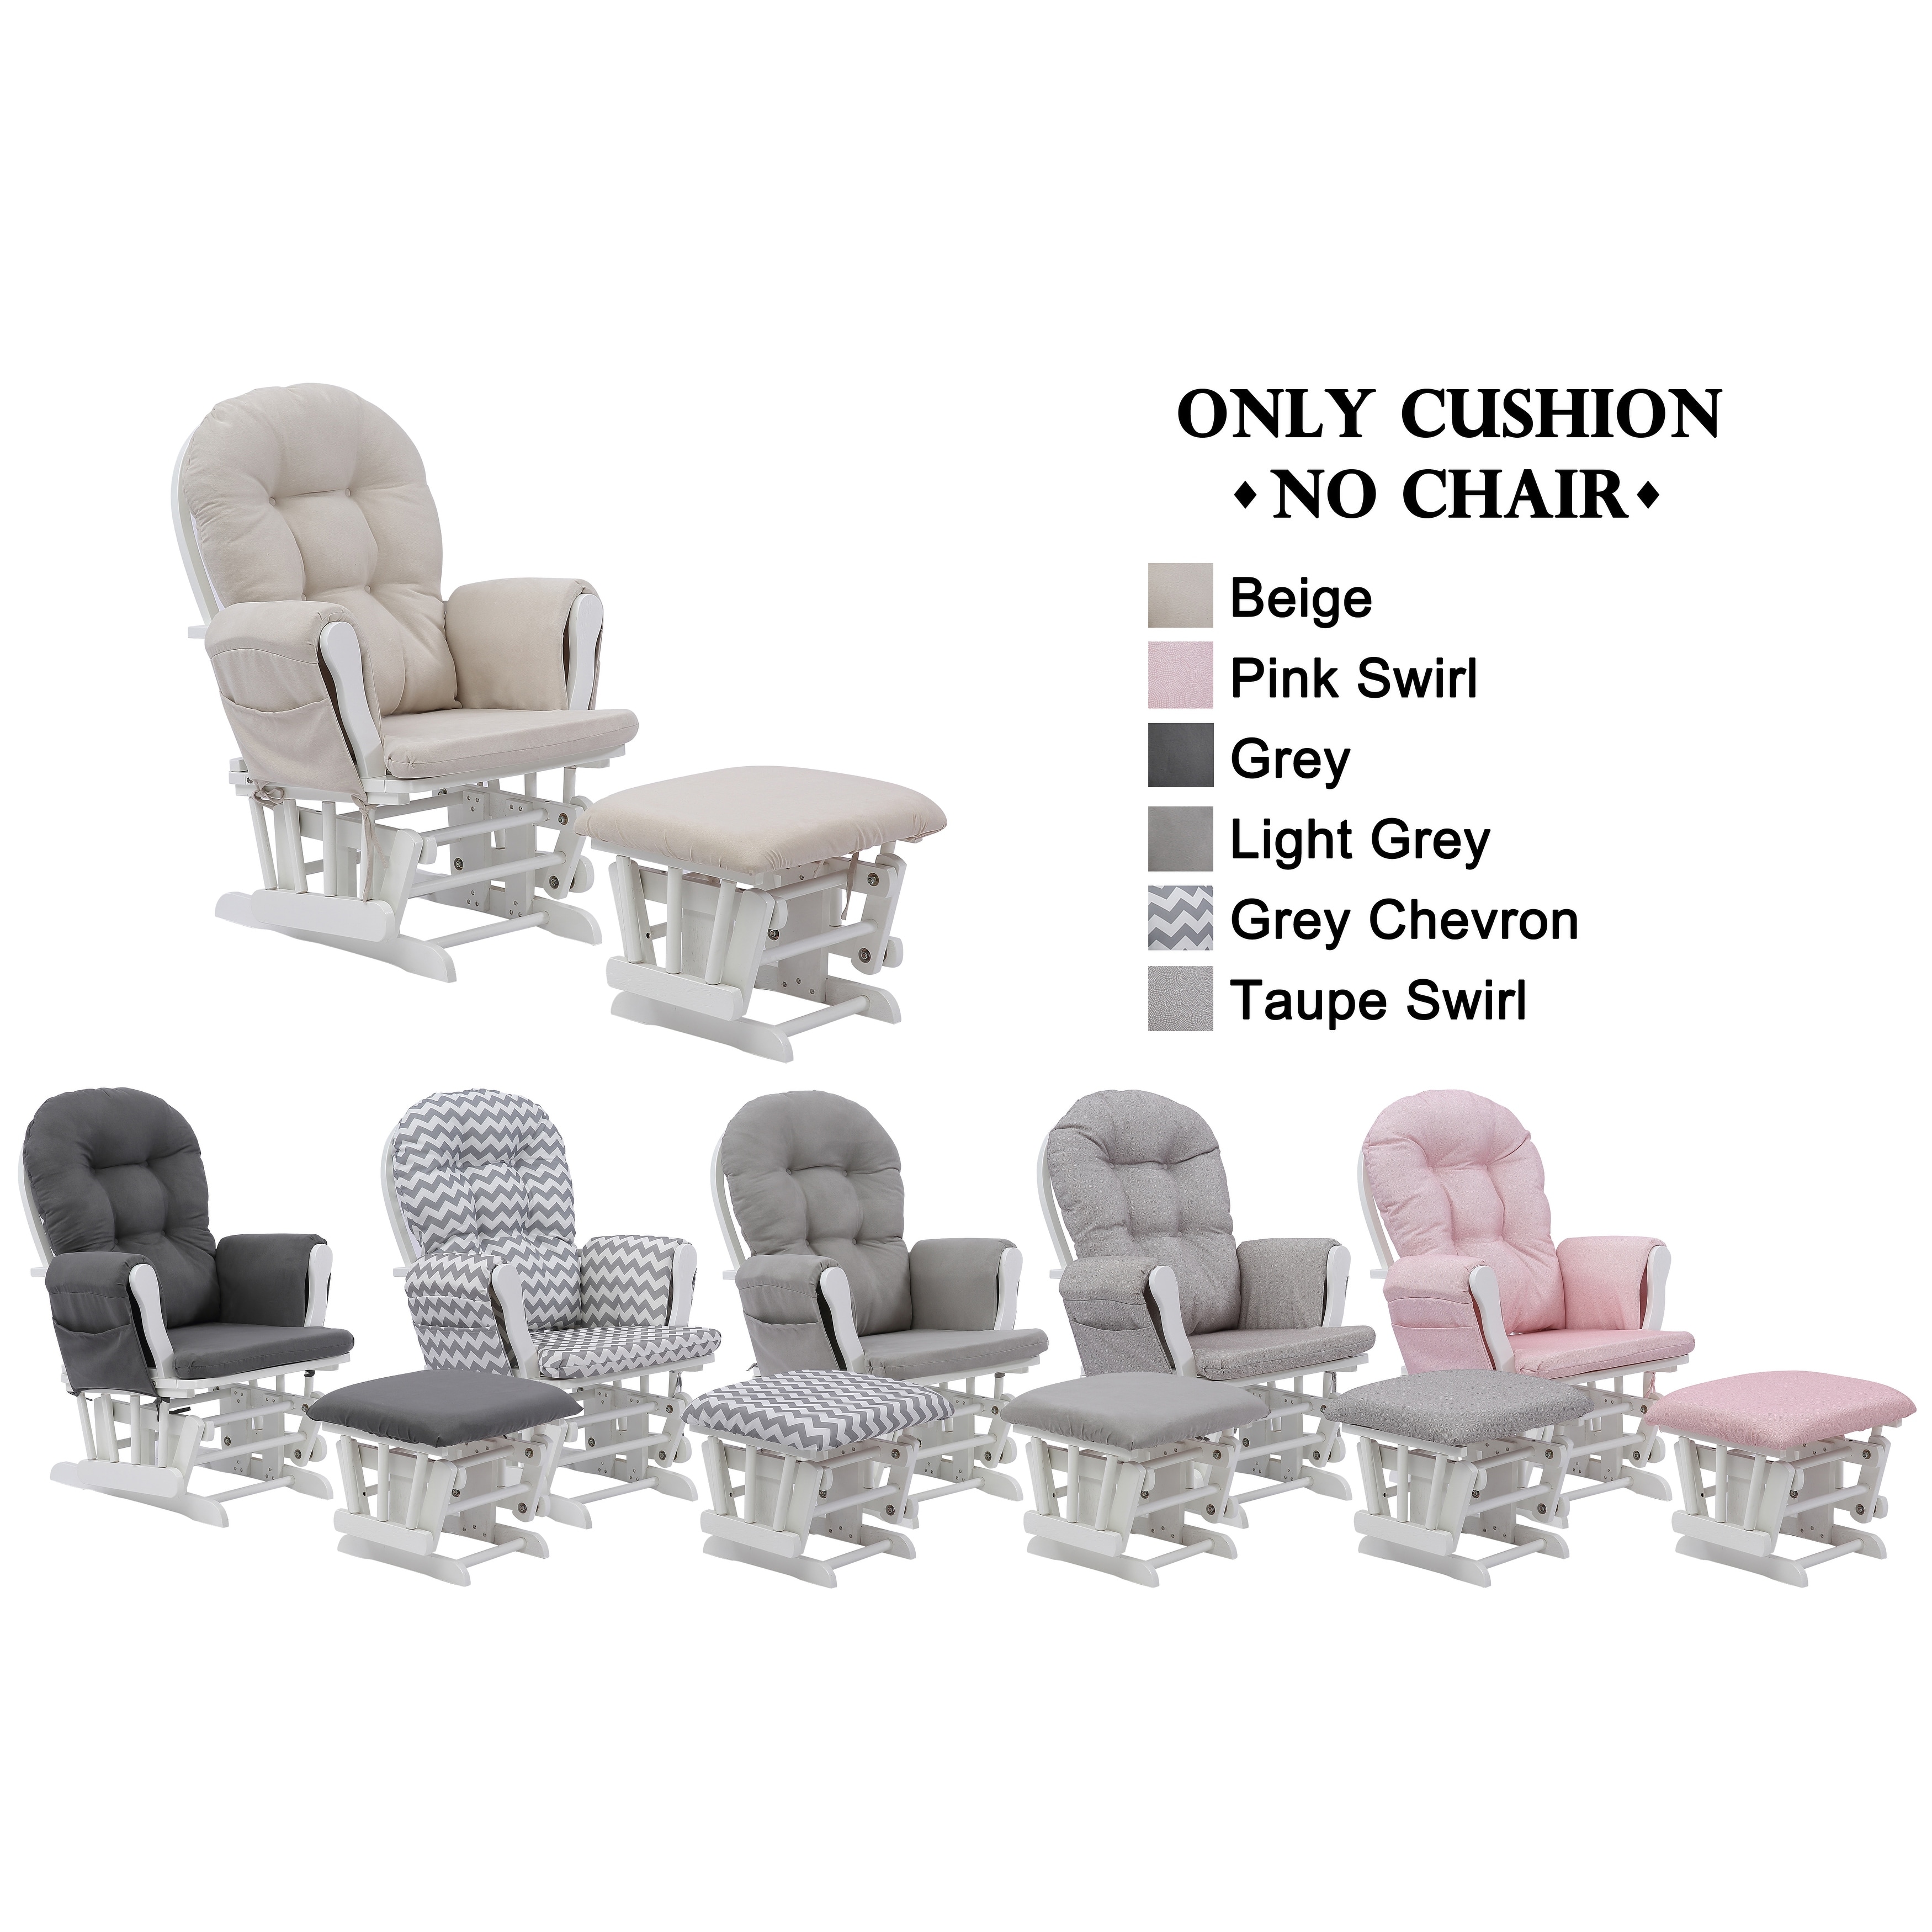 https://ak1.ostkcdn.com/images/products/is/images/direct/3b4df476a67d645caa086322c91a21e2ad6df2a9/Joy-Glider-Rocking-Chair-Replacement-Cushions-Set%2C-Beige.jpg